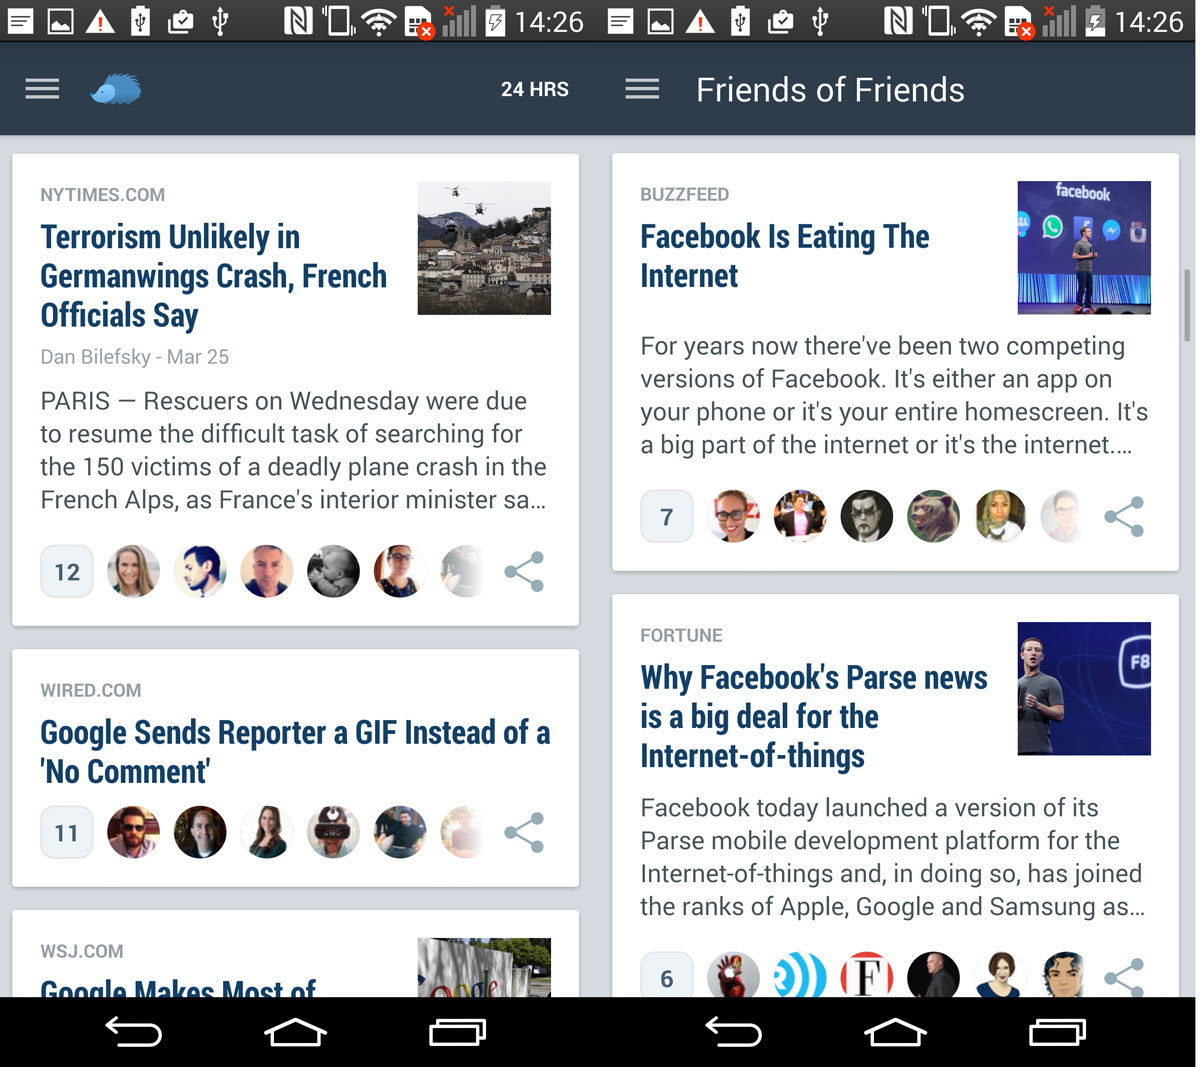 Nuzzel curates news shared by your Facebook and Twitter contacts